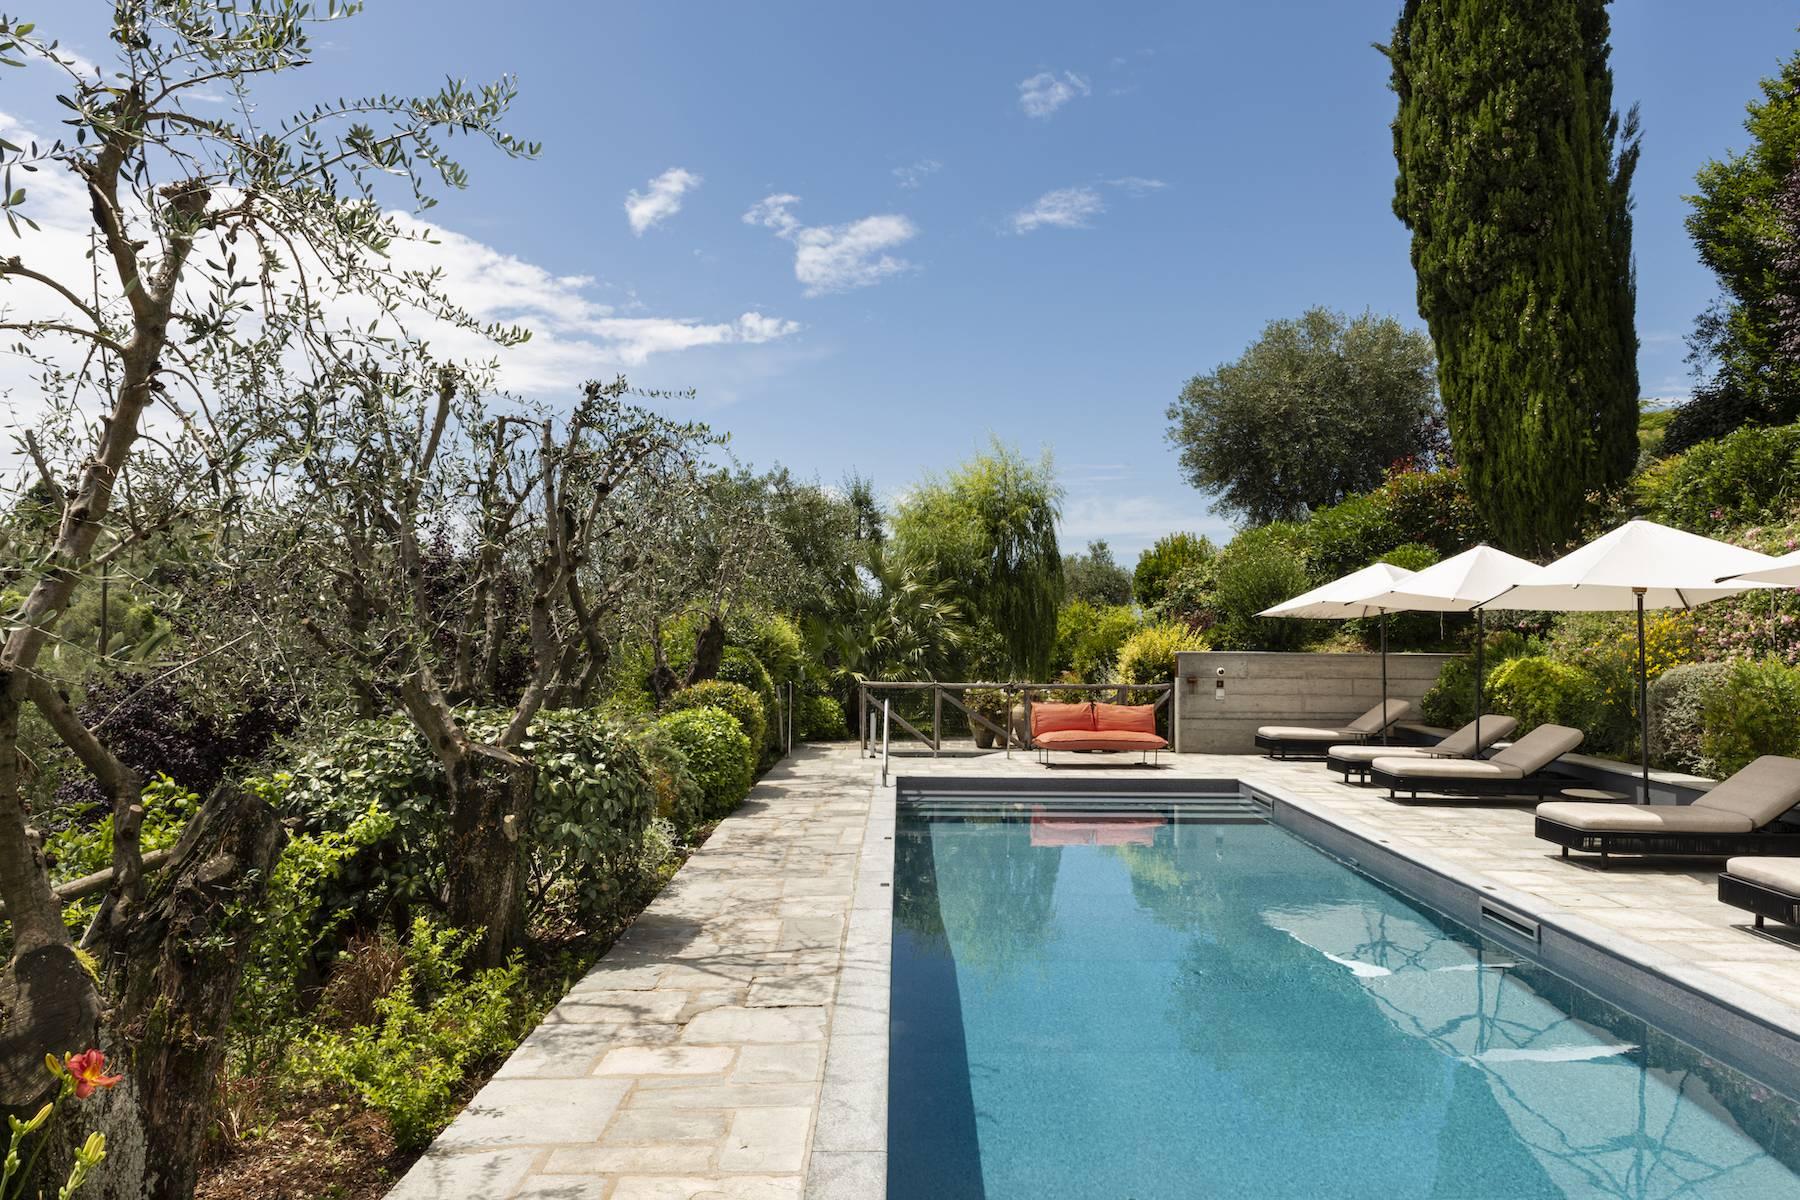 Luxury Boutique Hotel on the hills around Lucca - 4